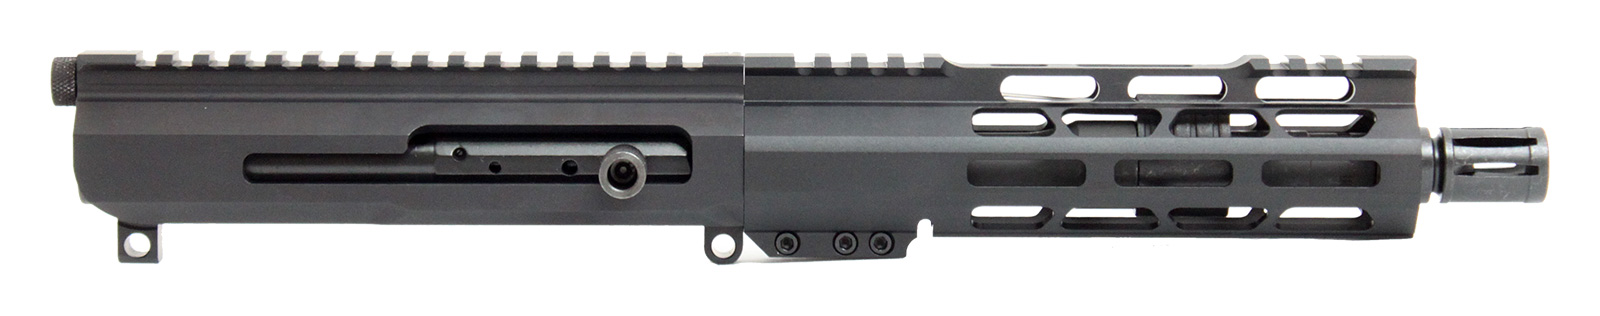 ar15 complete upper assembly 7 5 inch 223 wylde side charge m lok 160015